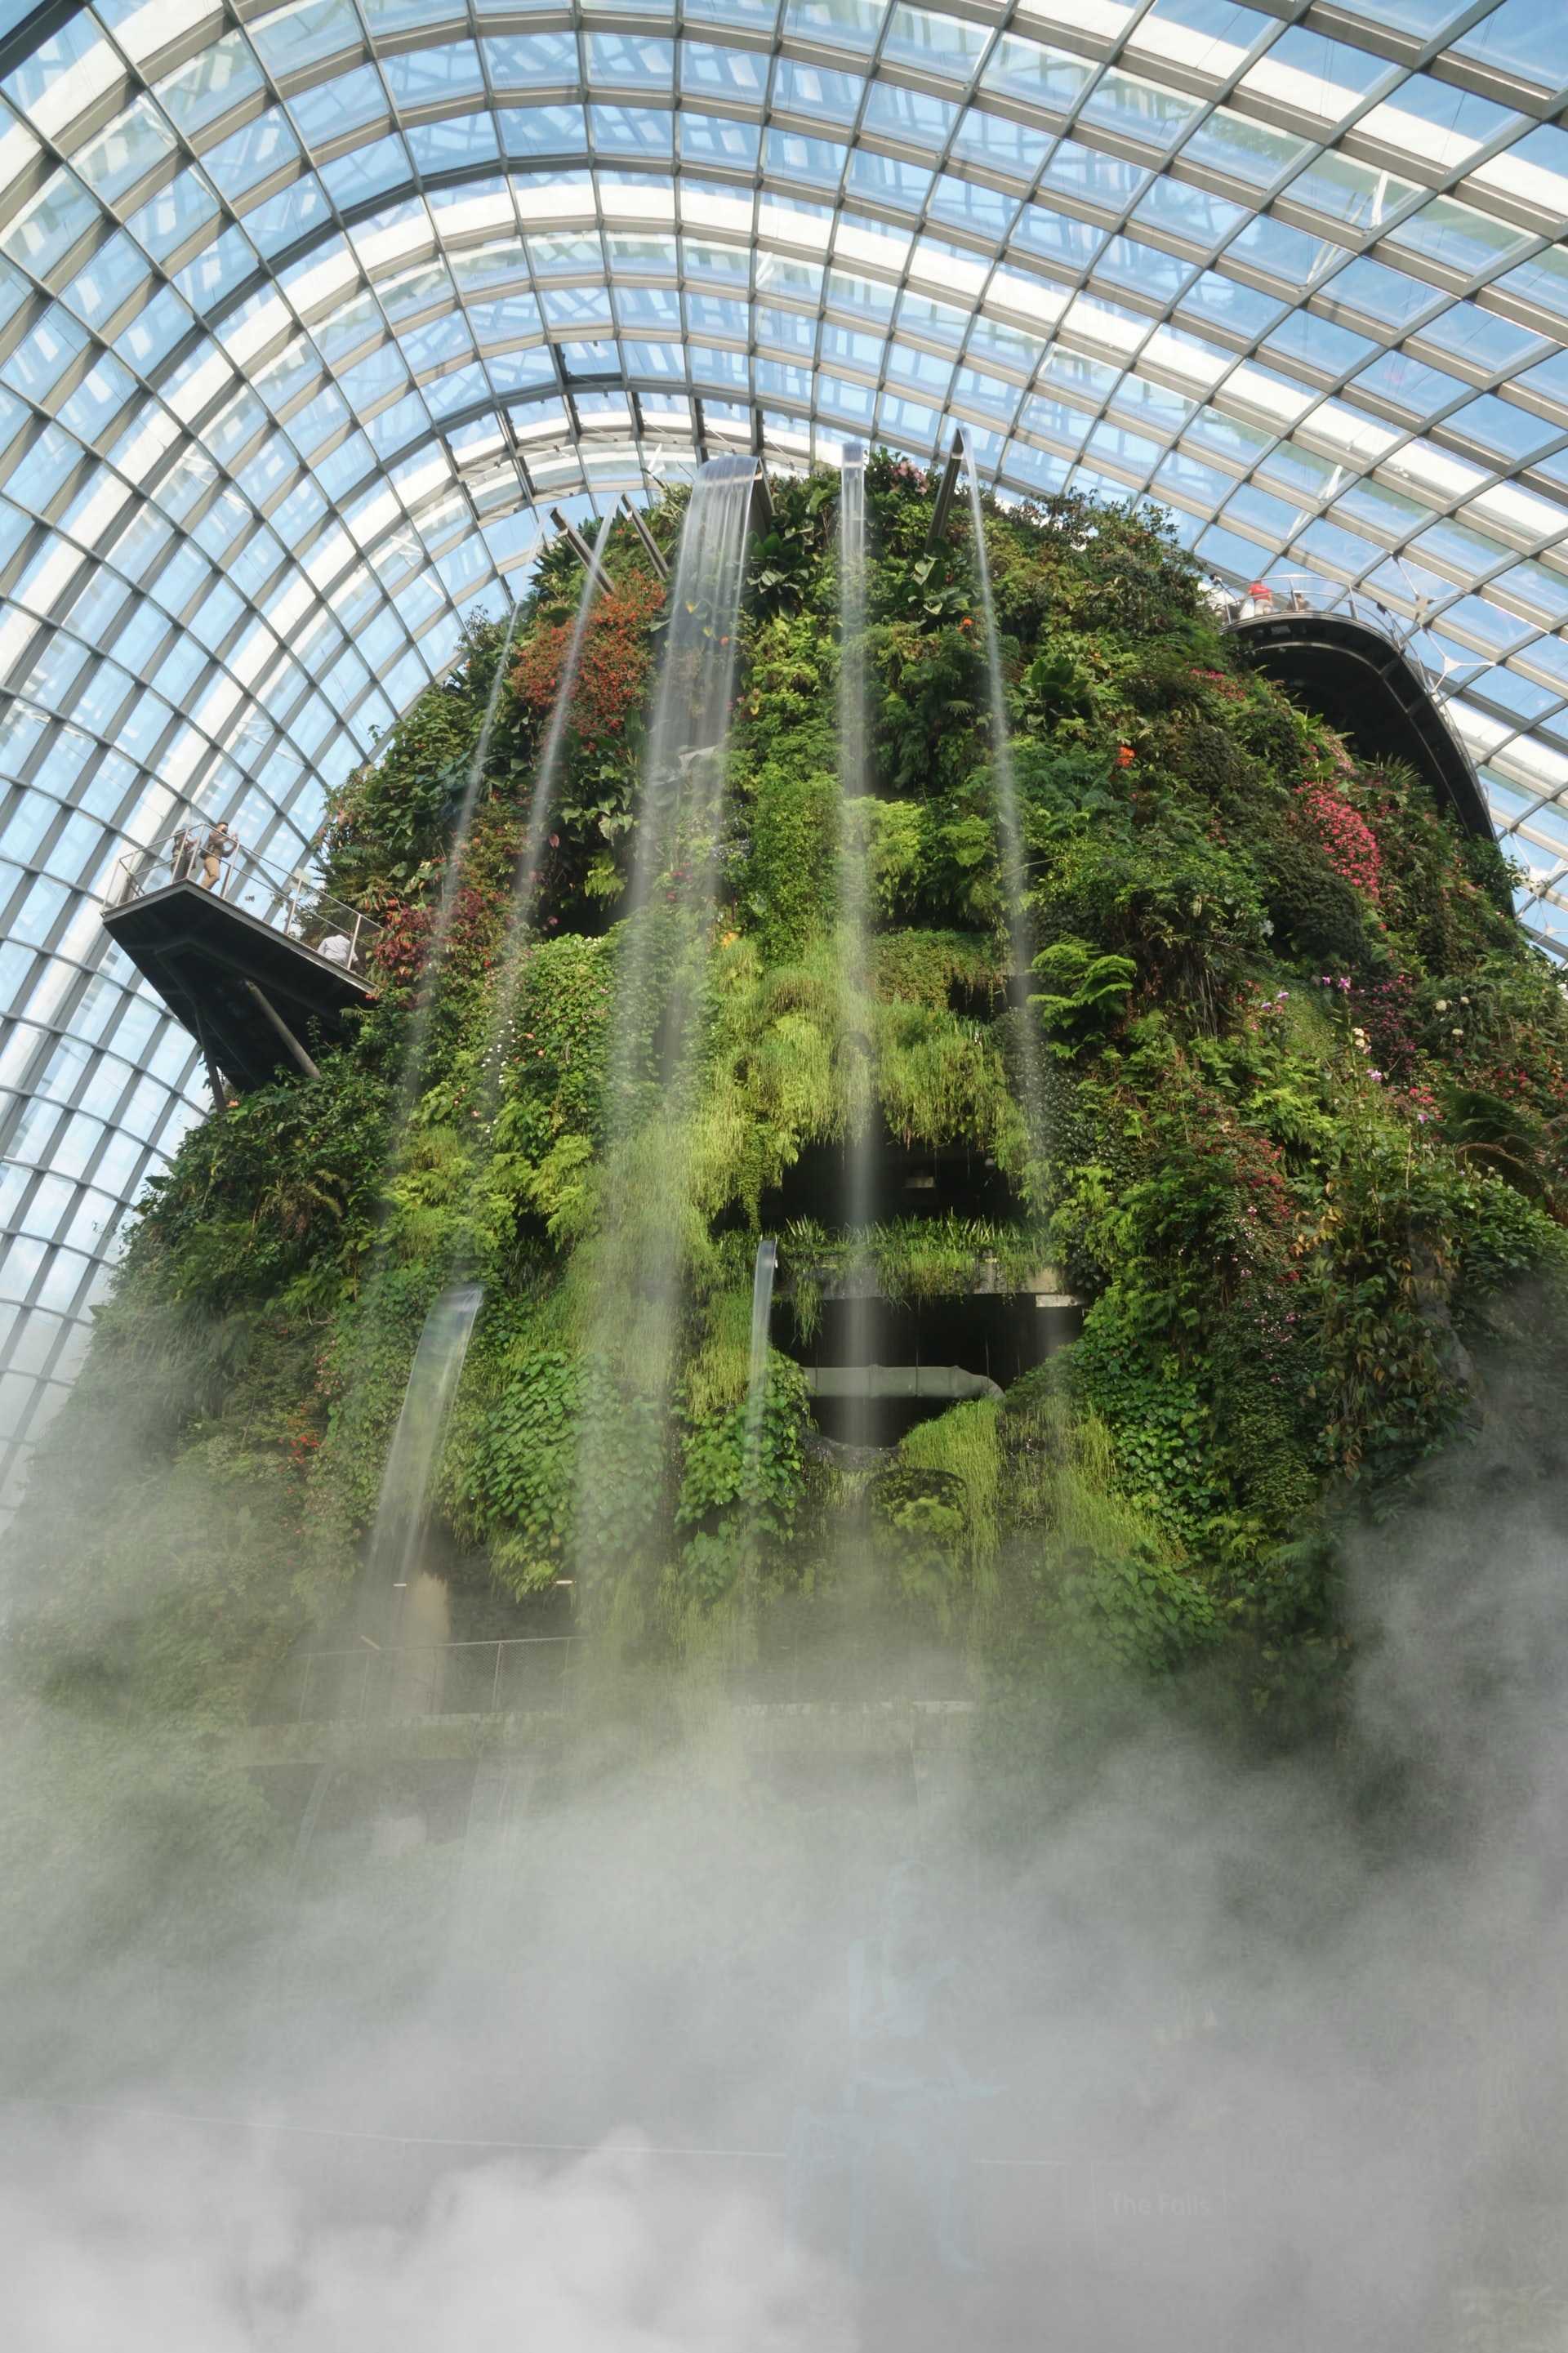 A large indoor green wall rises under a glass ceiling.